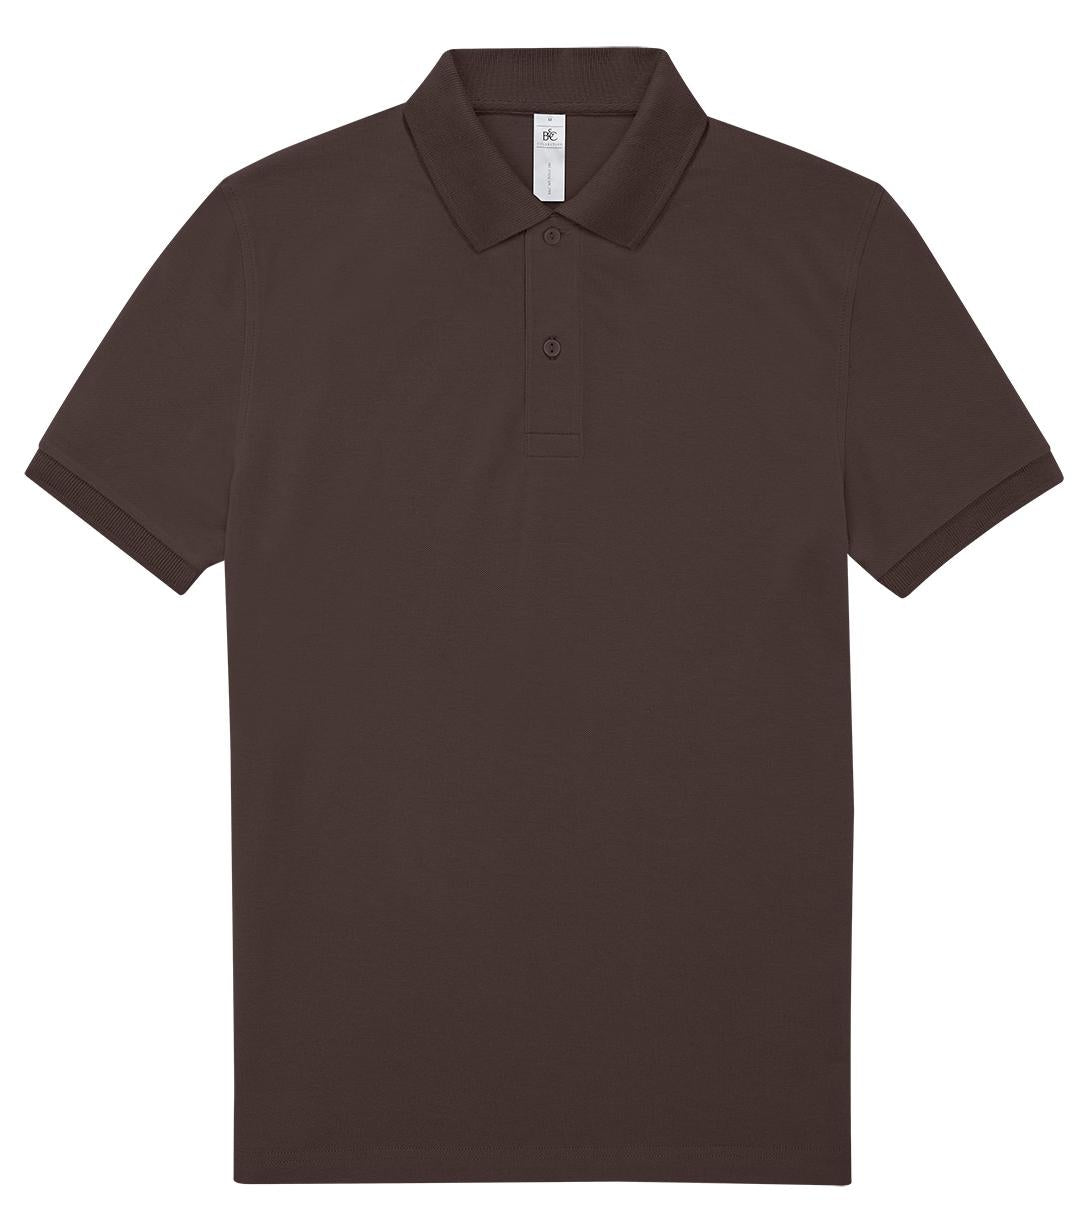 B&C Collection My Polo 180 - Roasted Coffee